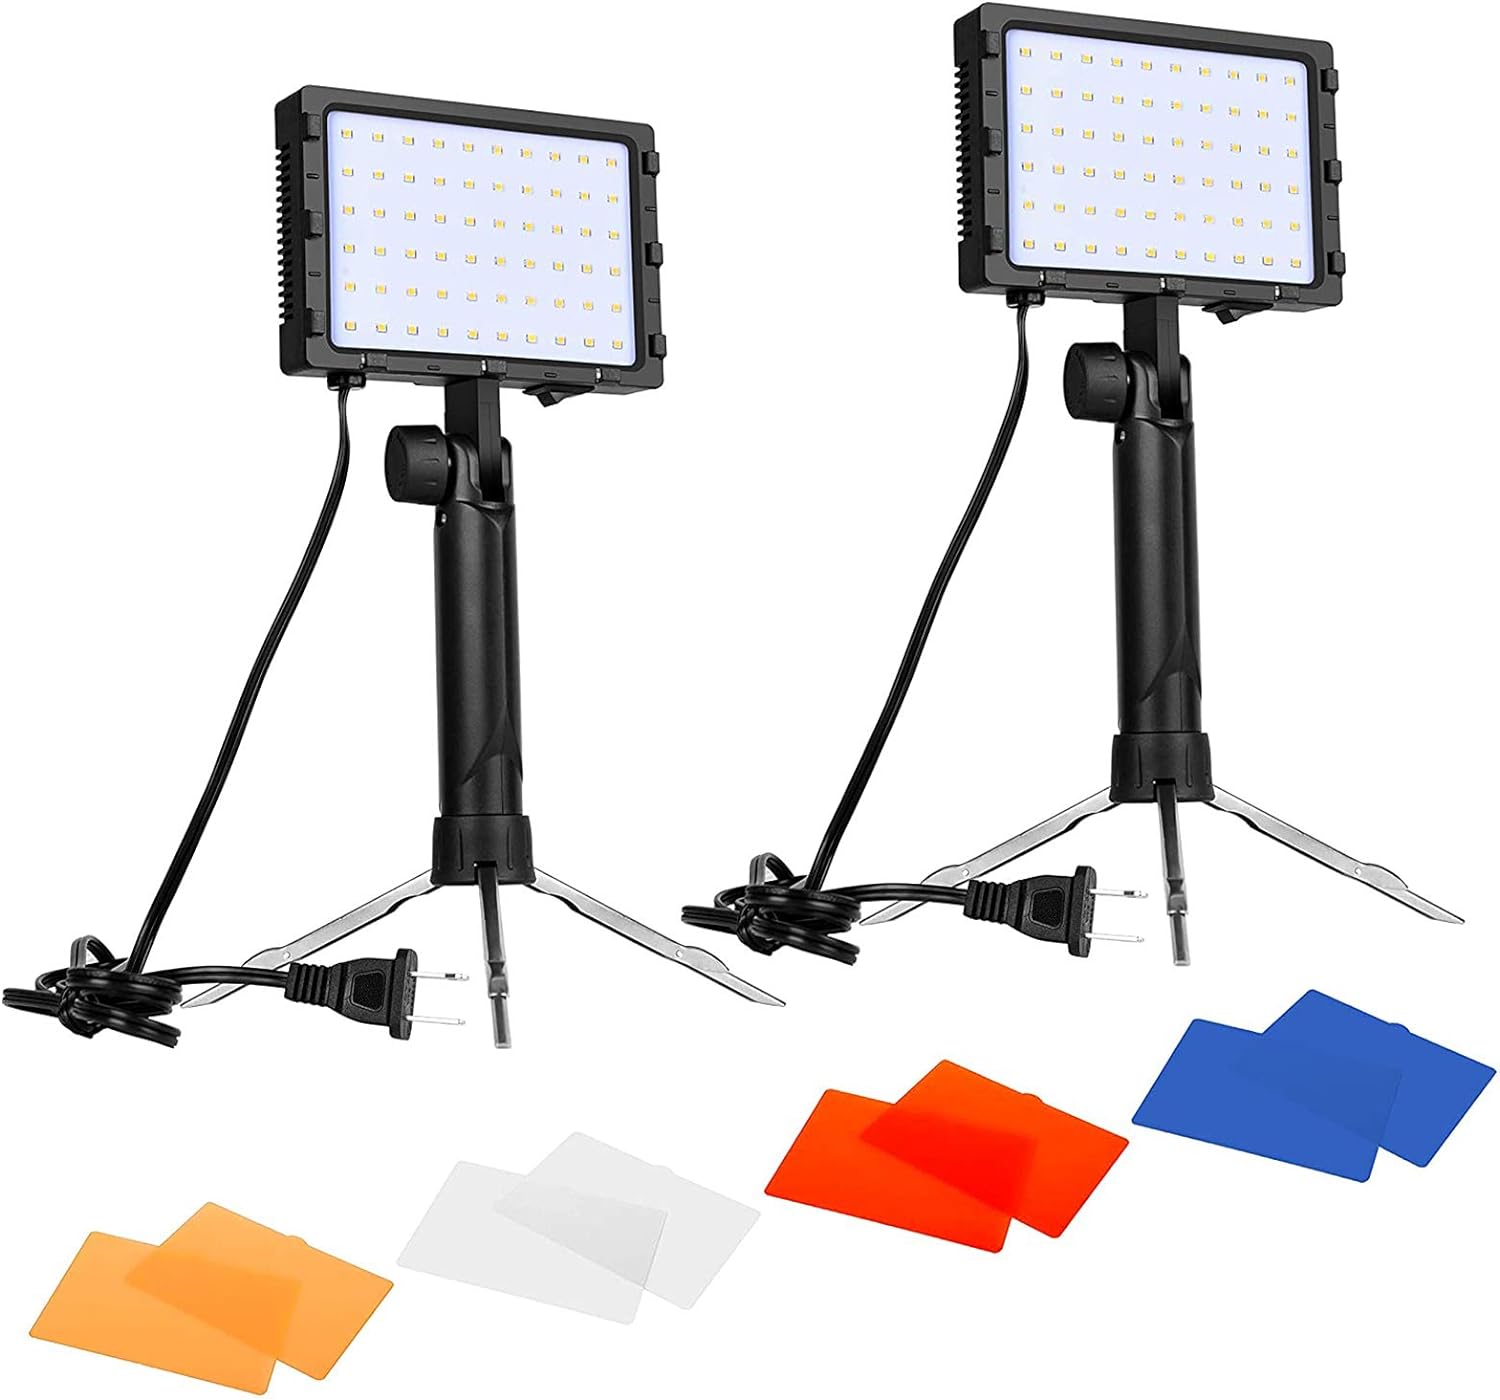 Tabletop Fluorescent 2-Light Product Photography Kit